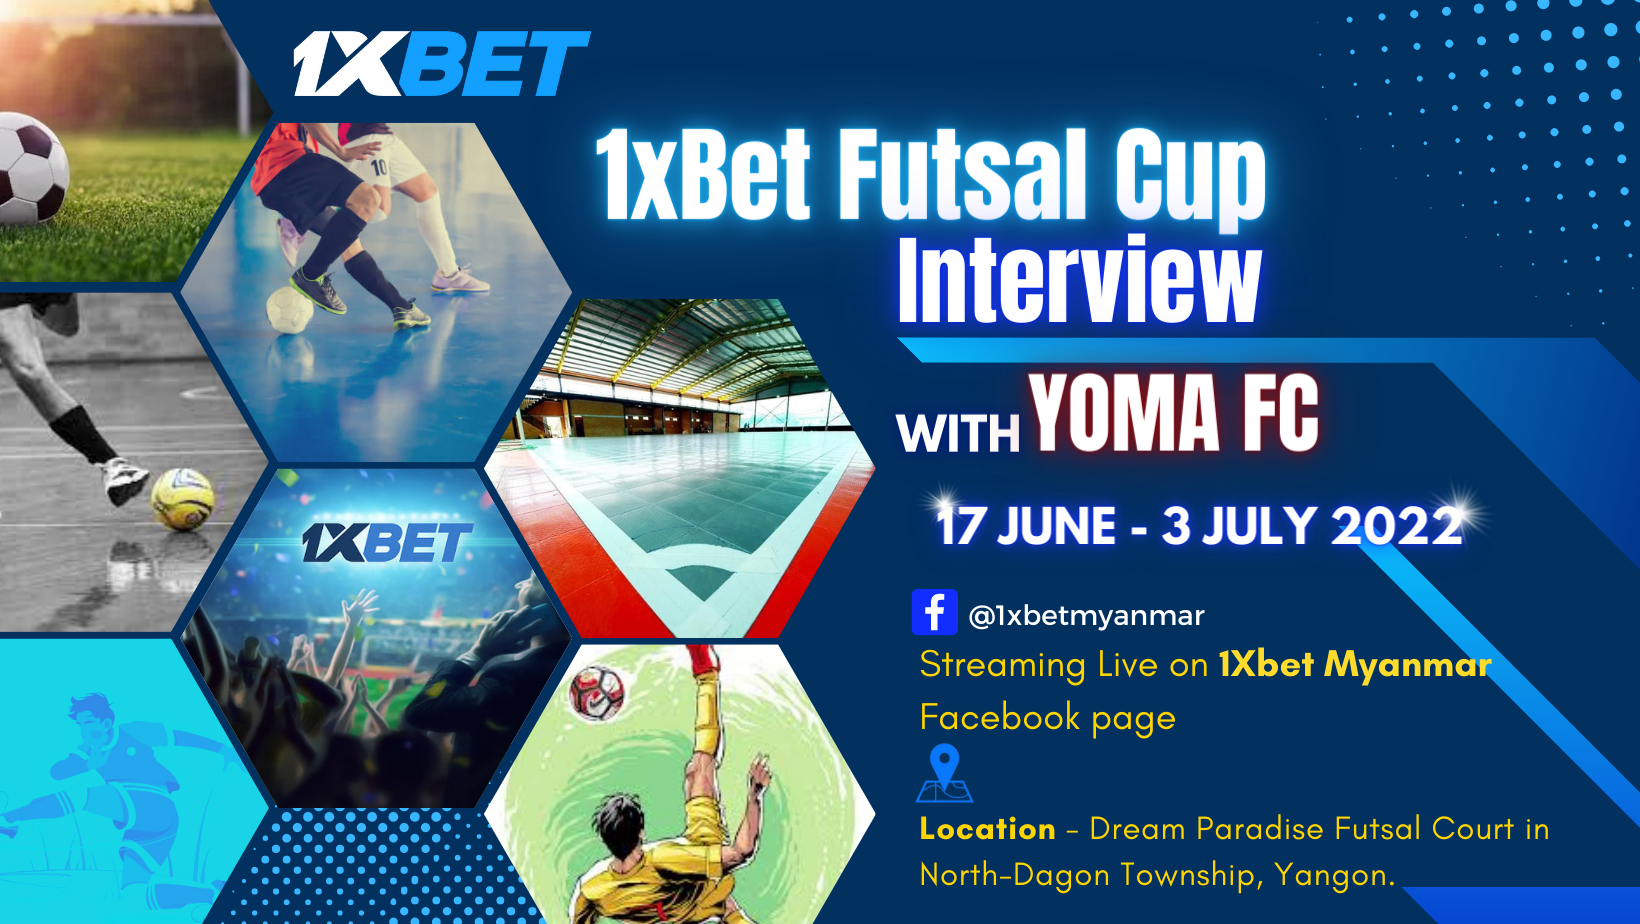 1xBet Myanmar Futsal Cup Interview with Yoma FC